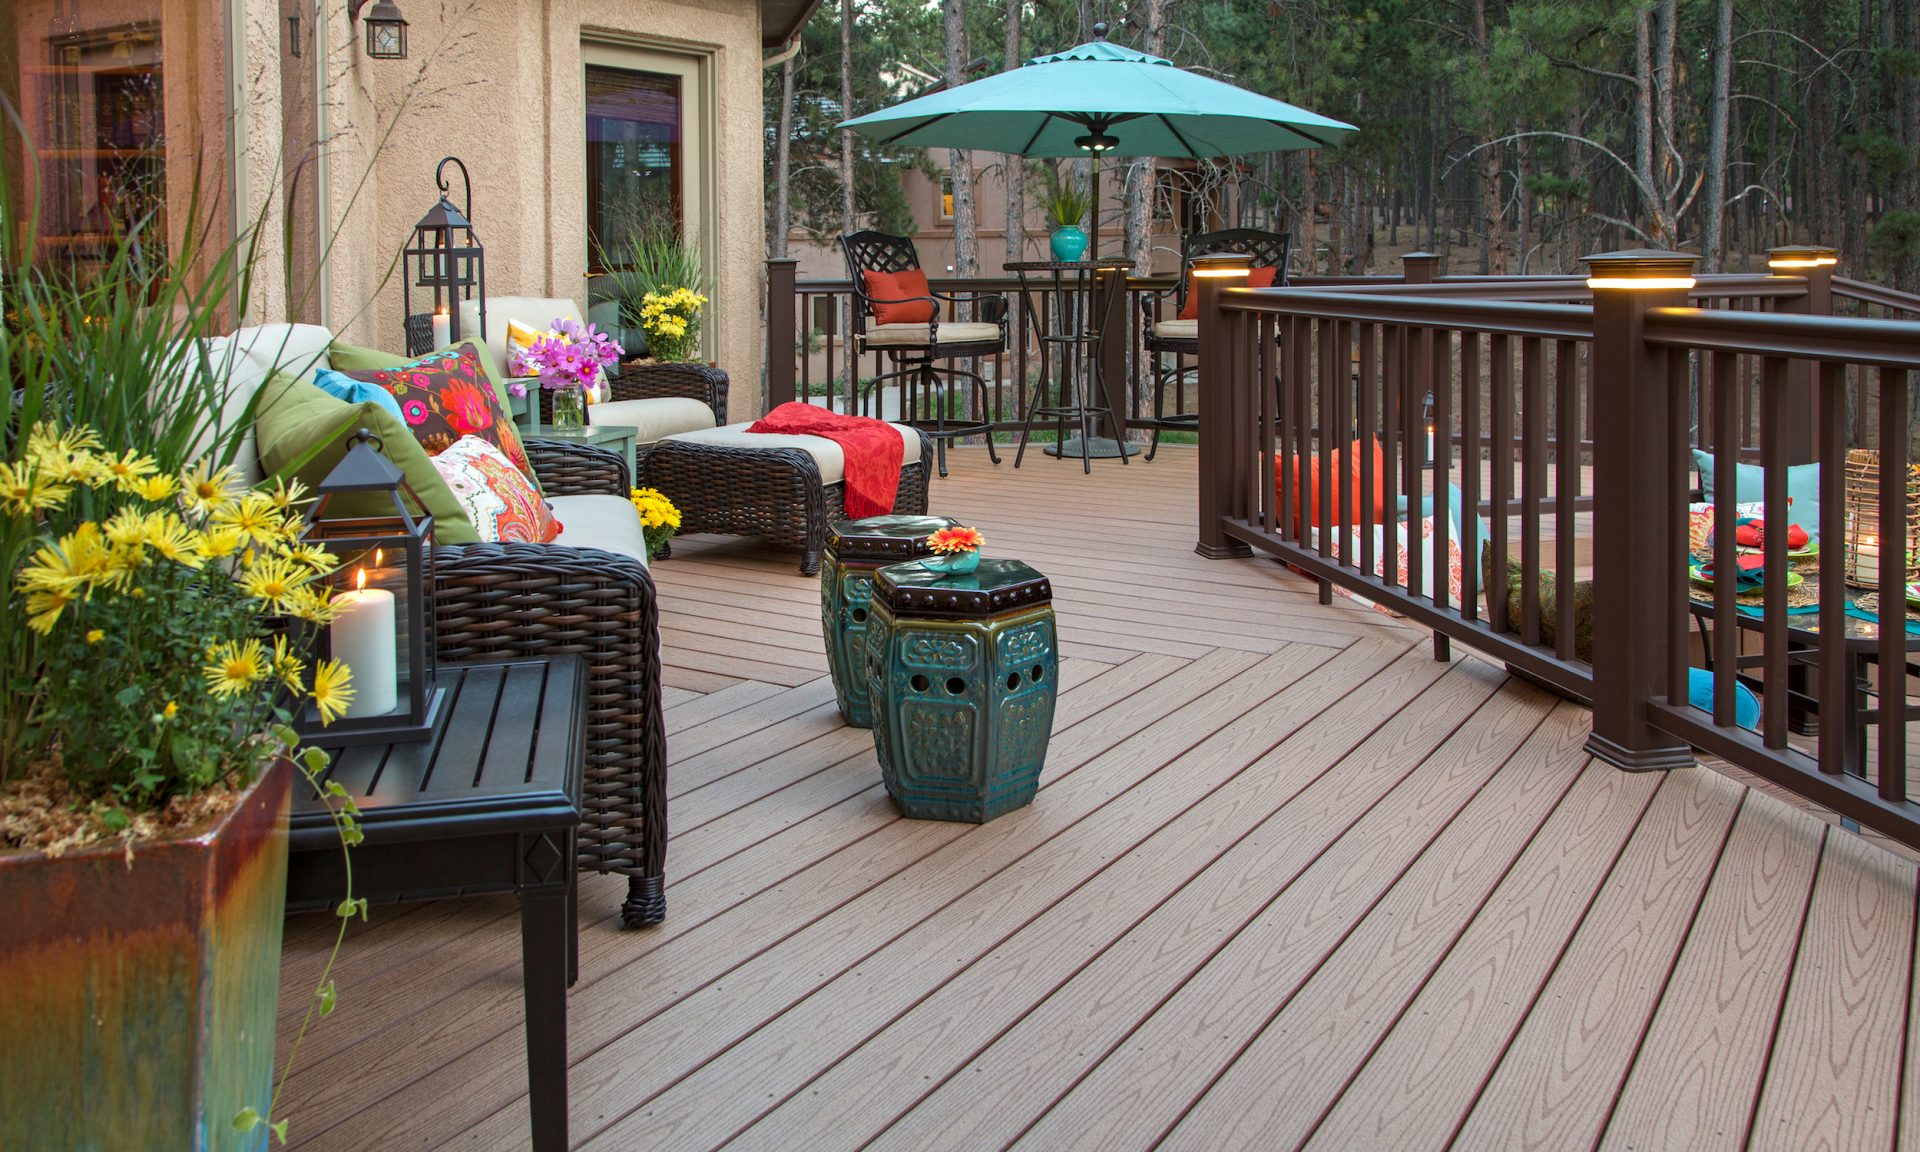 The Cost To Build A Deck 4 Ways Save Nerdwallet - Estimated Cost To Build A Patio